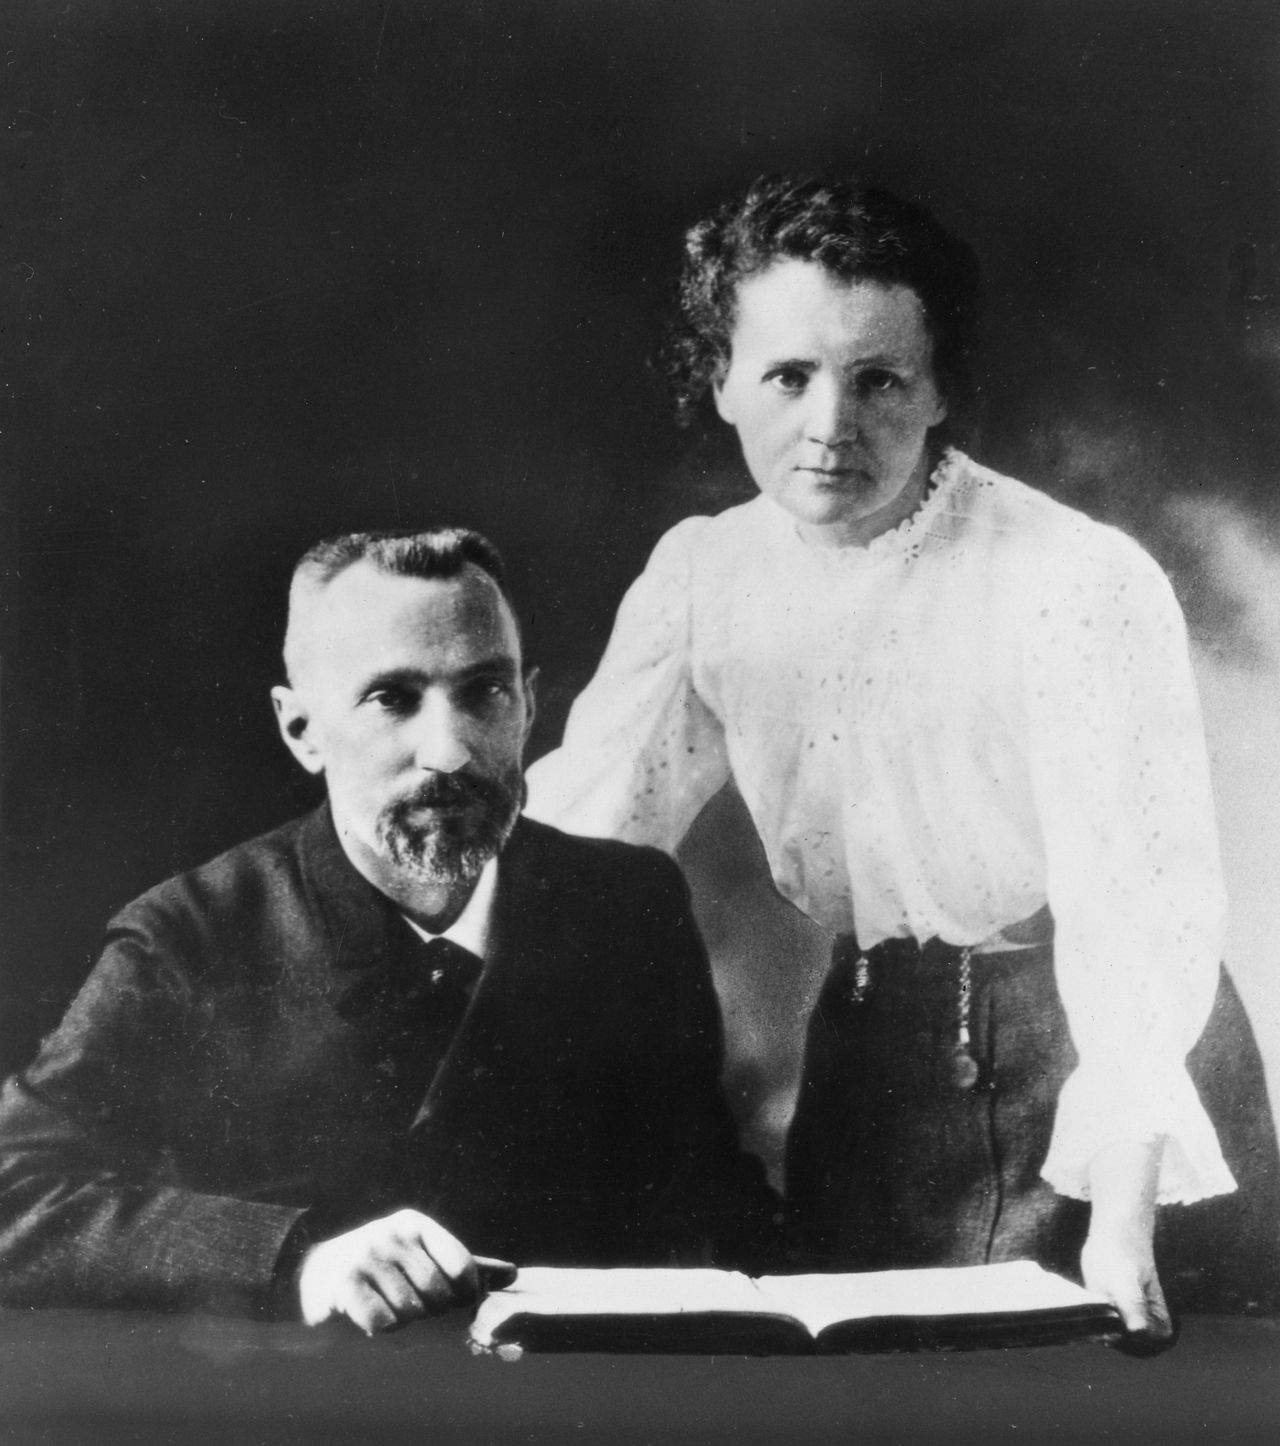 Pierre_Curie_and_Marie_Curie-in_1903